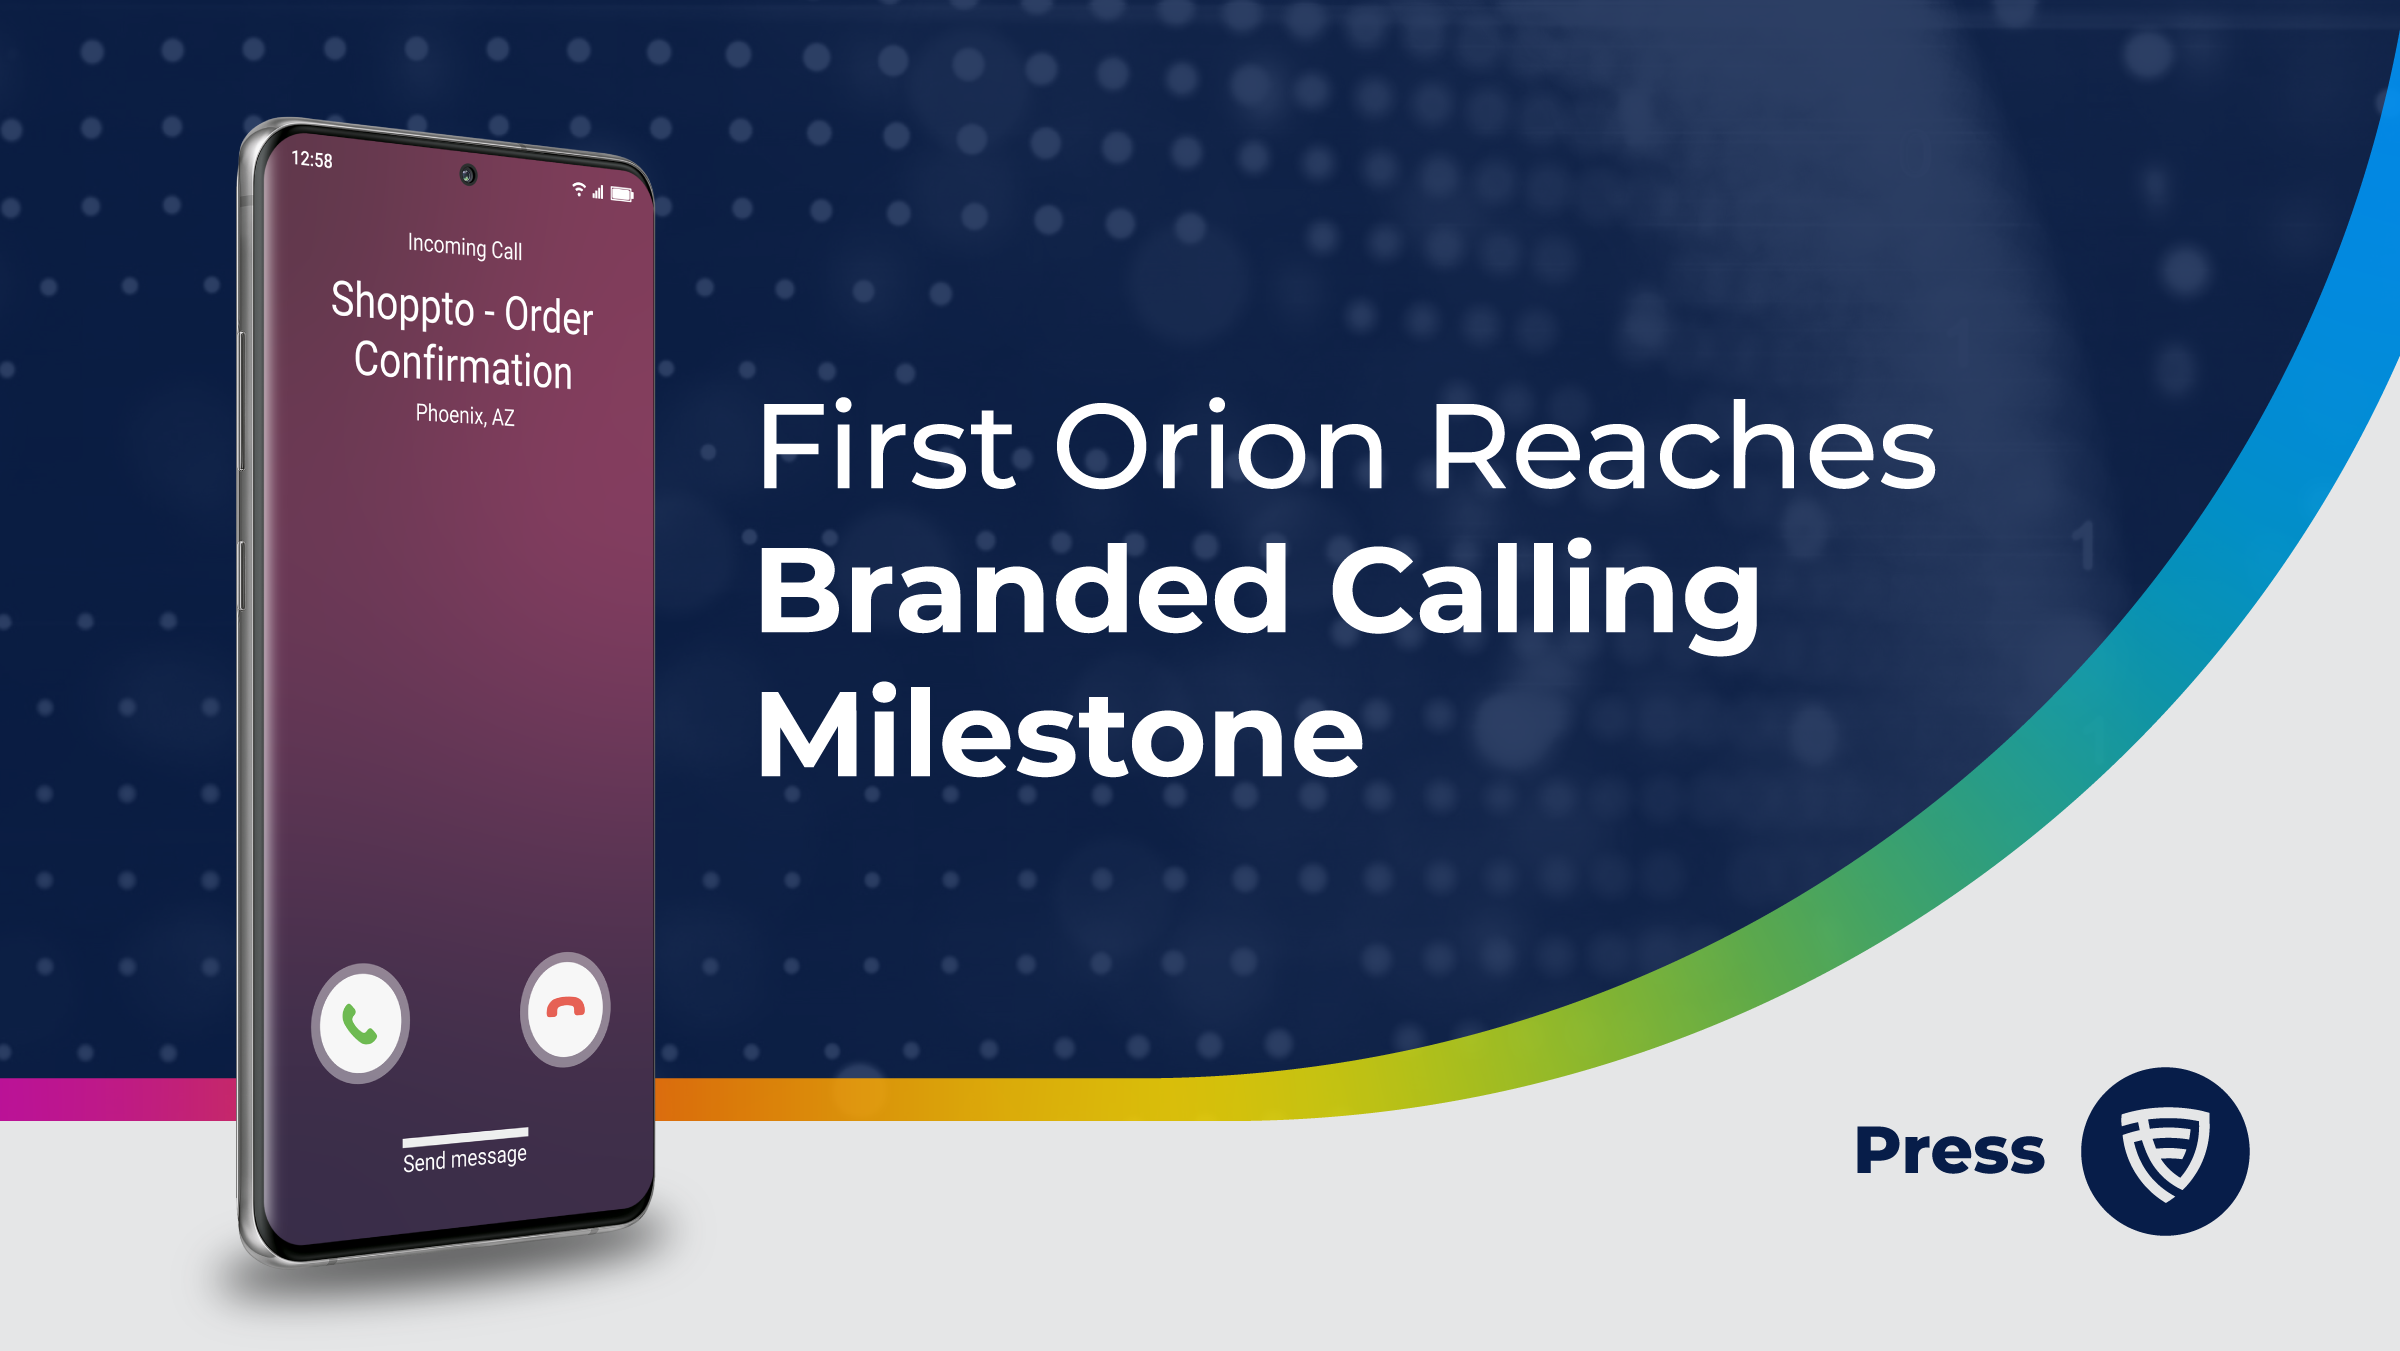 First Orion Reaches Branded Calling Milestone